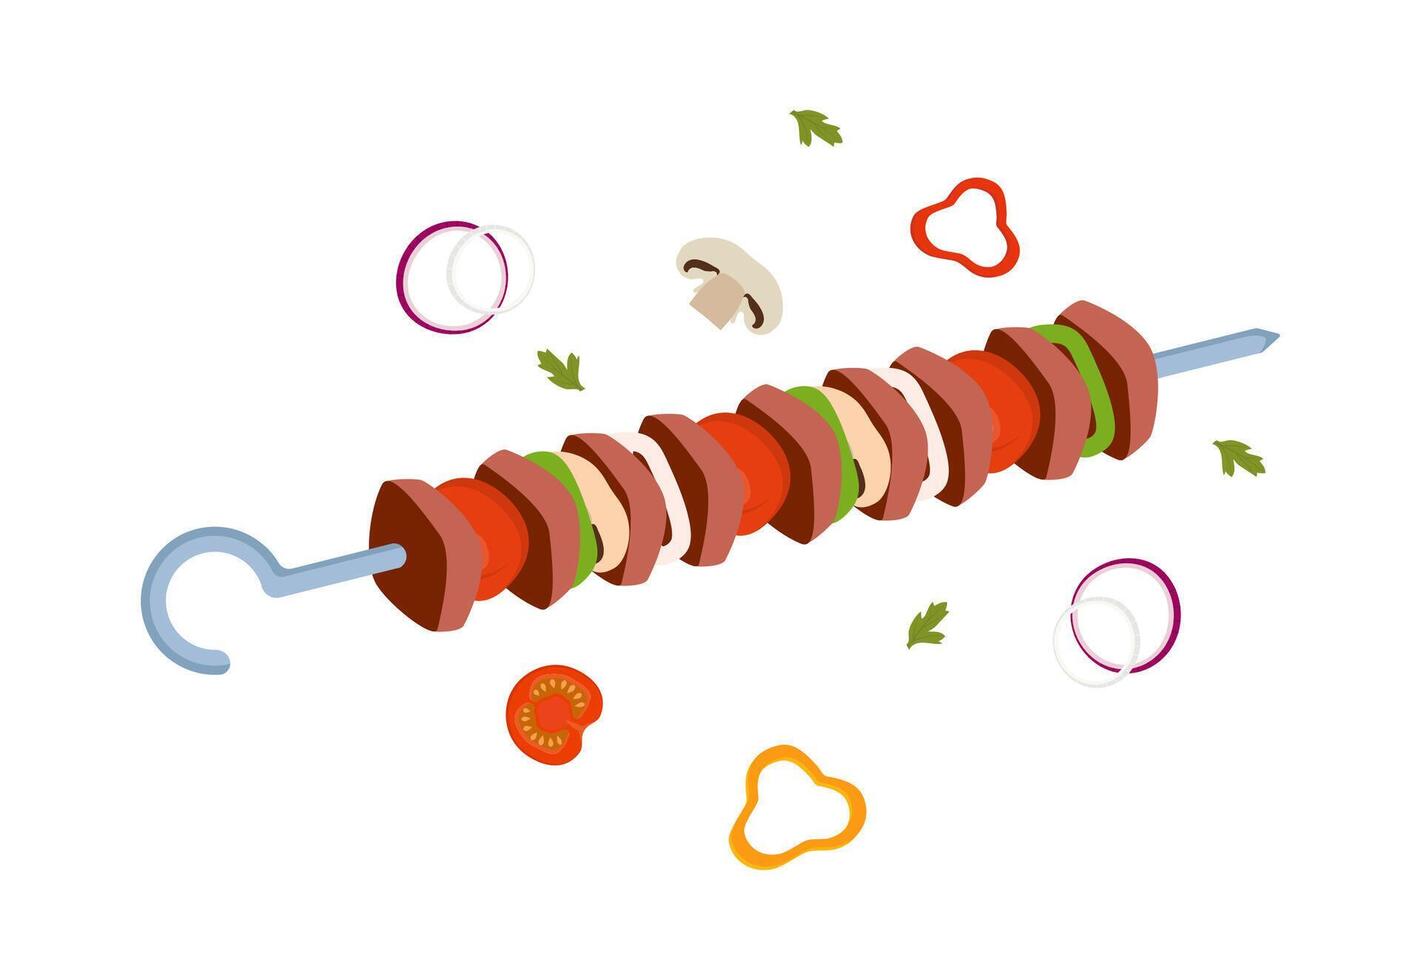 Kebab, shashlik, grilled on skewer, food meat. Shish kebab with slice onions, pepper, and tomato. Grilled BBQ food. Traditional juicy barbecue, kebab. Vector illustration.